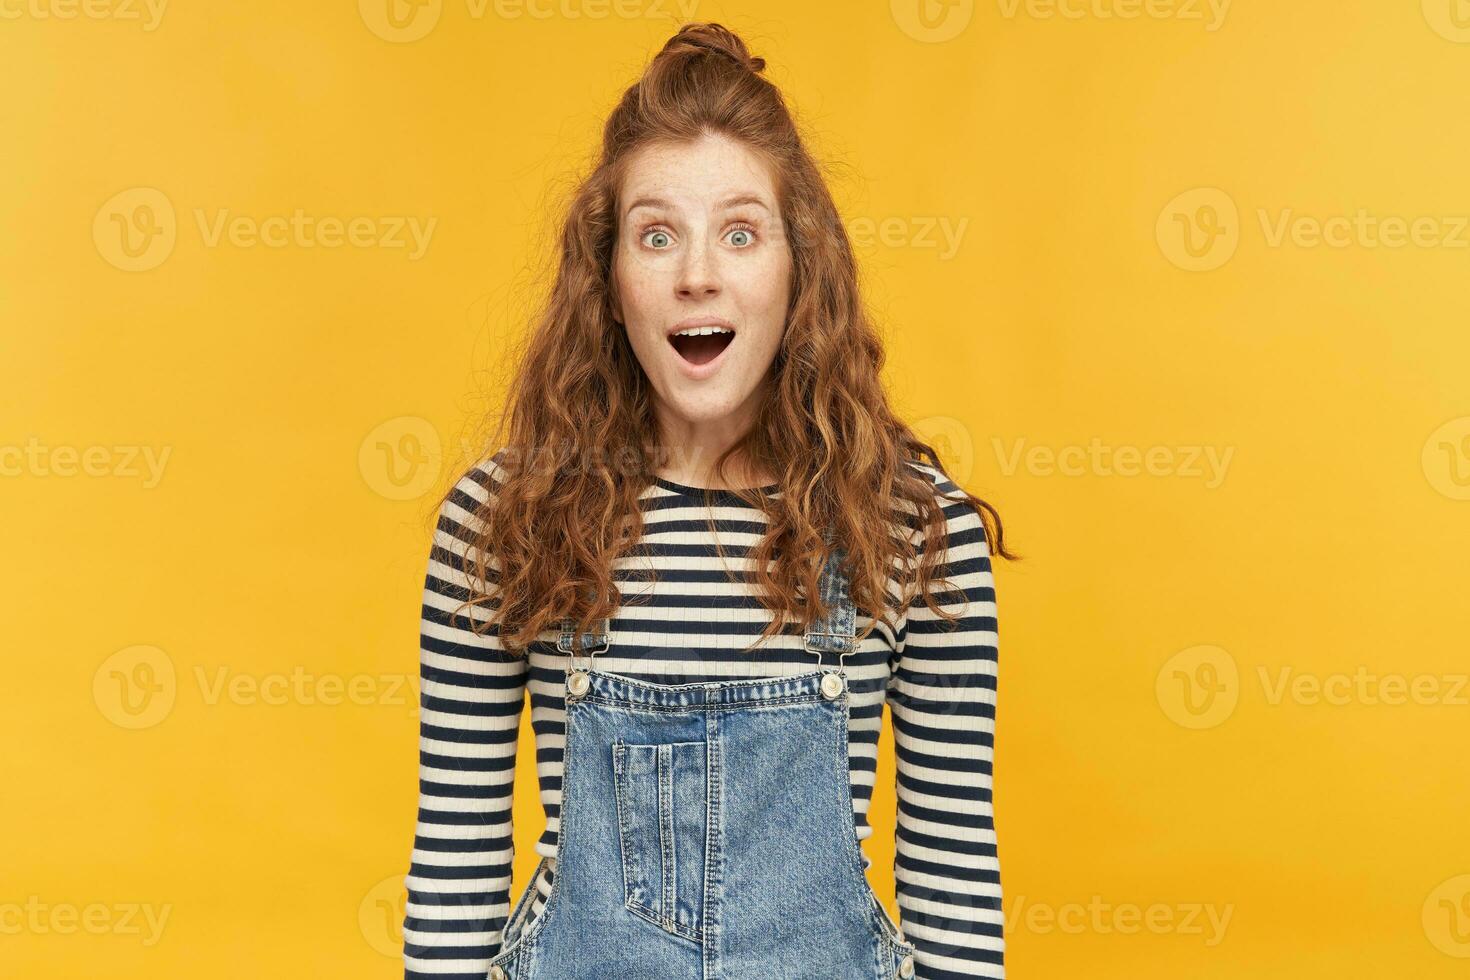 indoor portrait of amazed young ginger girl, wears denim overalls and stripped shirt, starring into camera with widely opened mouth and eyes. shocked, amazed facial expression. photo